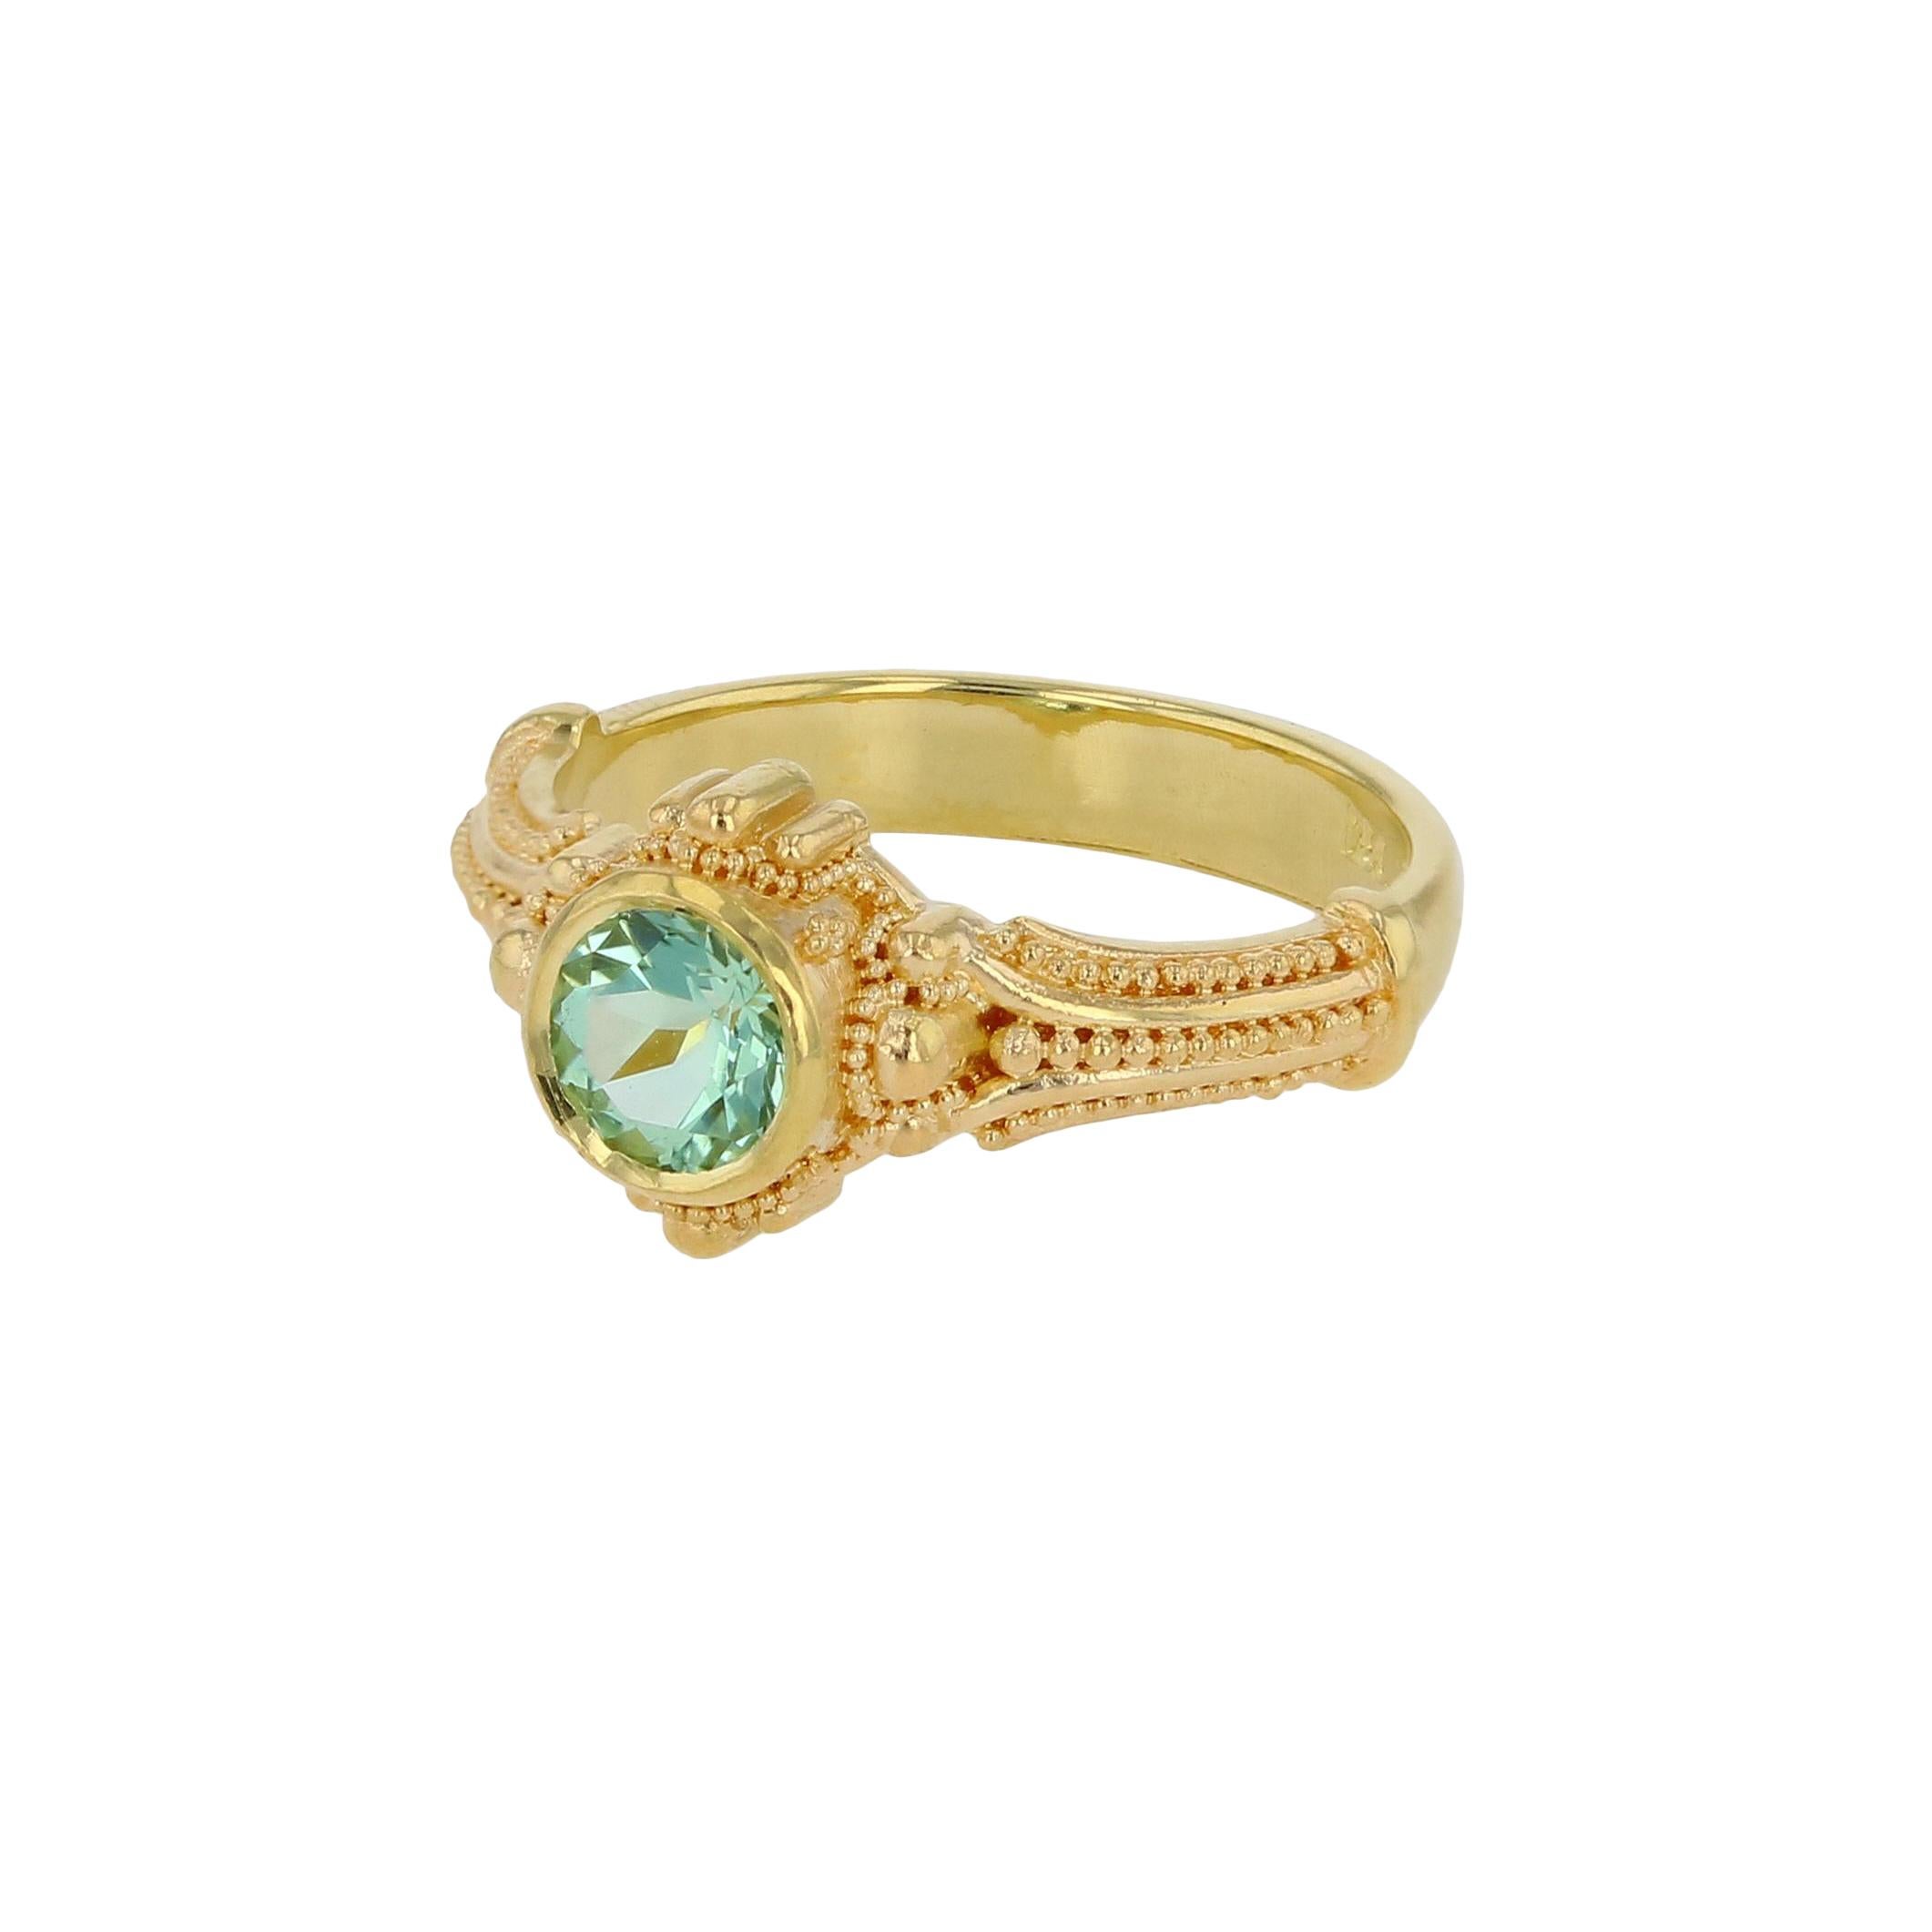 The soft but bright and alluring glow of Seafoam Tourmaline is on full display in Kent Raible's solitaire ring. The fine detailing and granulation create the perfect frame, not overpowering but serve to inhance the beauty of this gemstone.

This